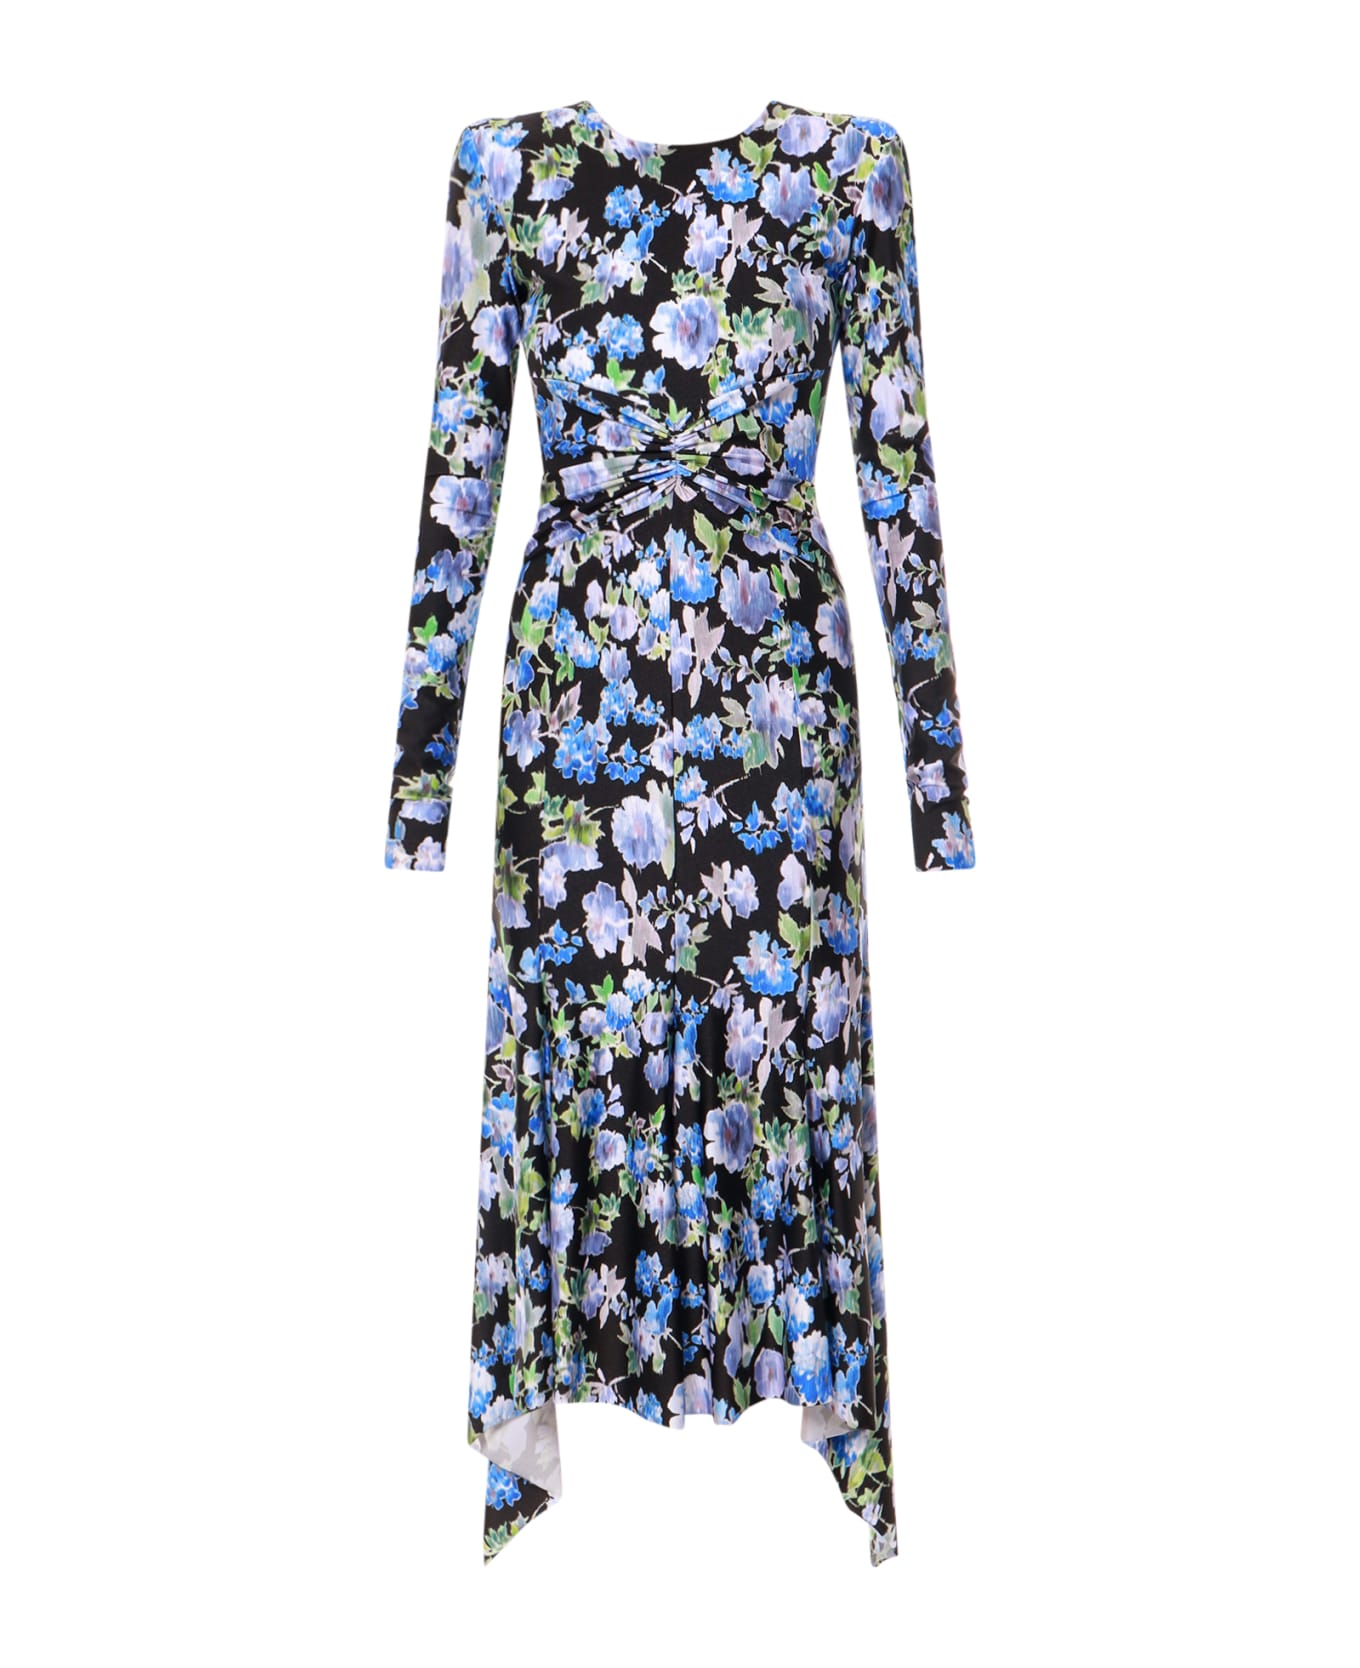 Philosophy di Lorenzo Serafini Black And Blue Maxi Dress With All-over Floreal Print In Stretch Fabric Woman - Multicolor